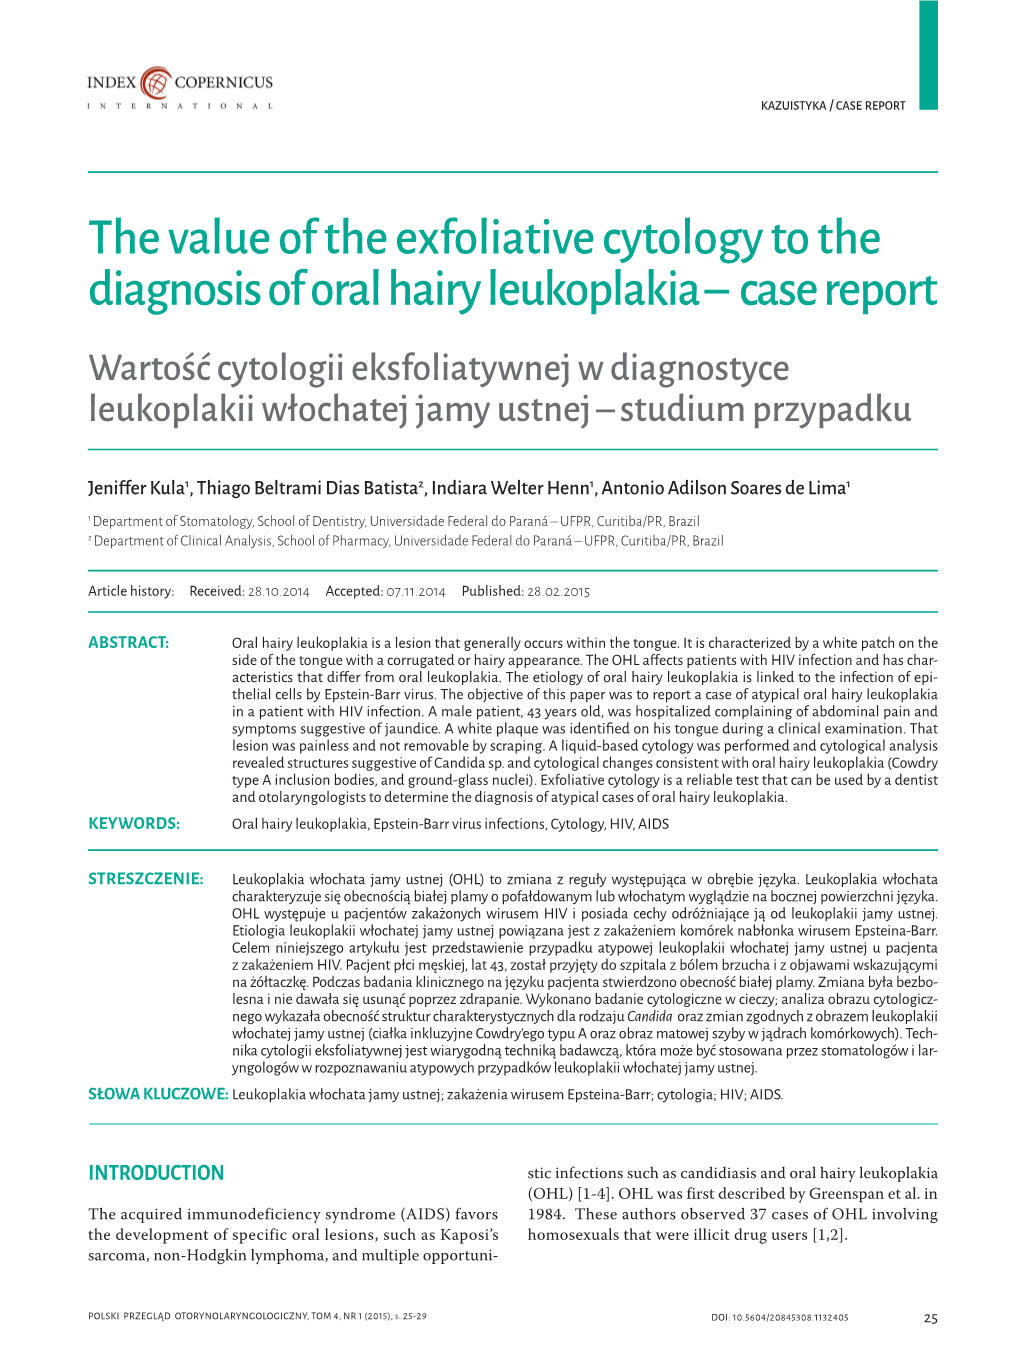 The Value of the Exfoliative Cytology to the Diagnosis of Oral Hairy Leukoplakia